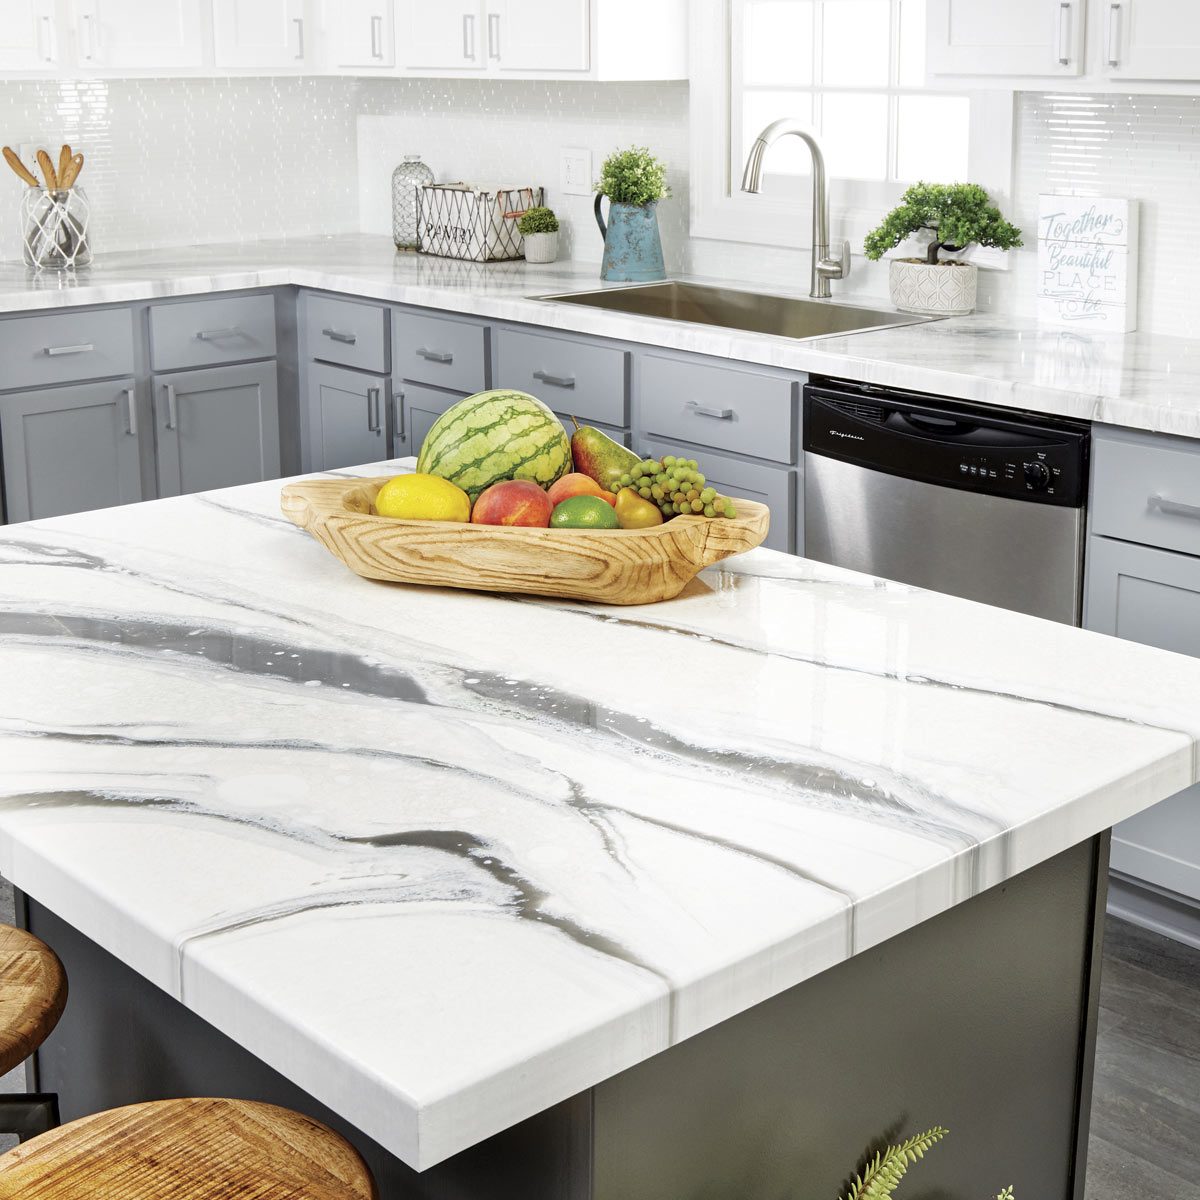 Diy Epoxy Countertops How To Pour An, Can You Put Granite Over Existing Countertops